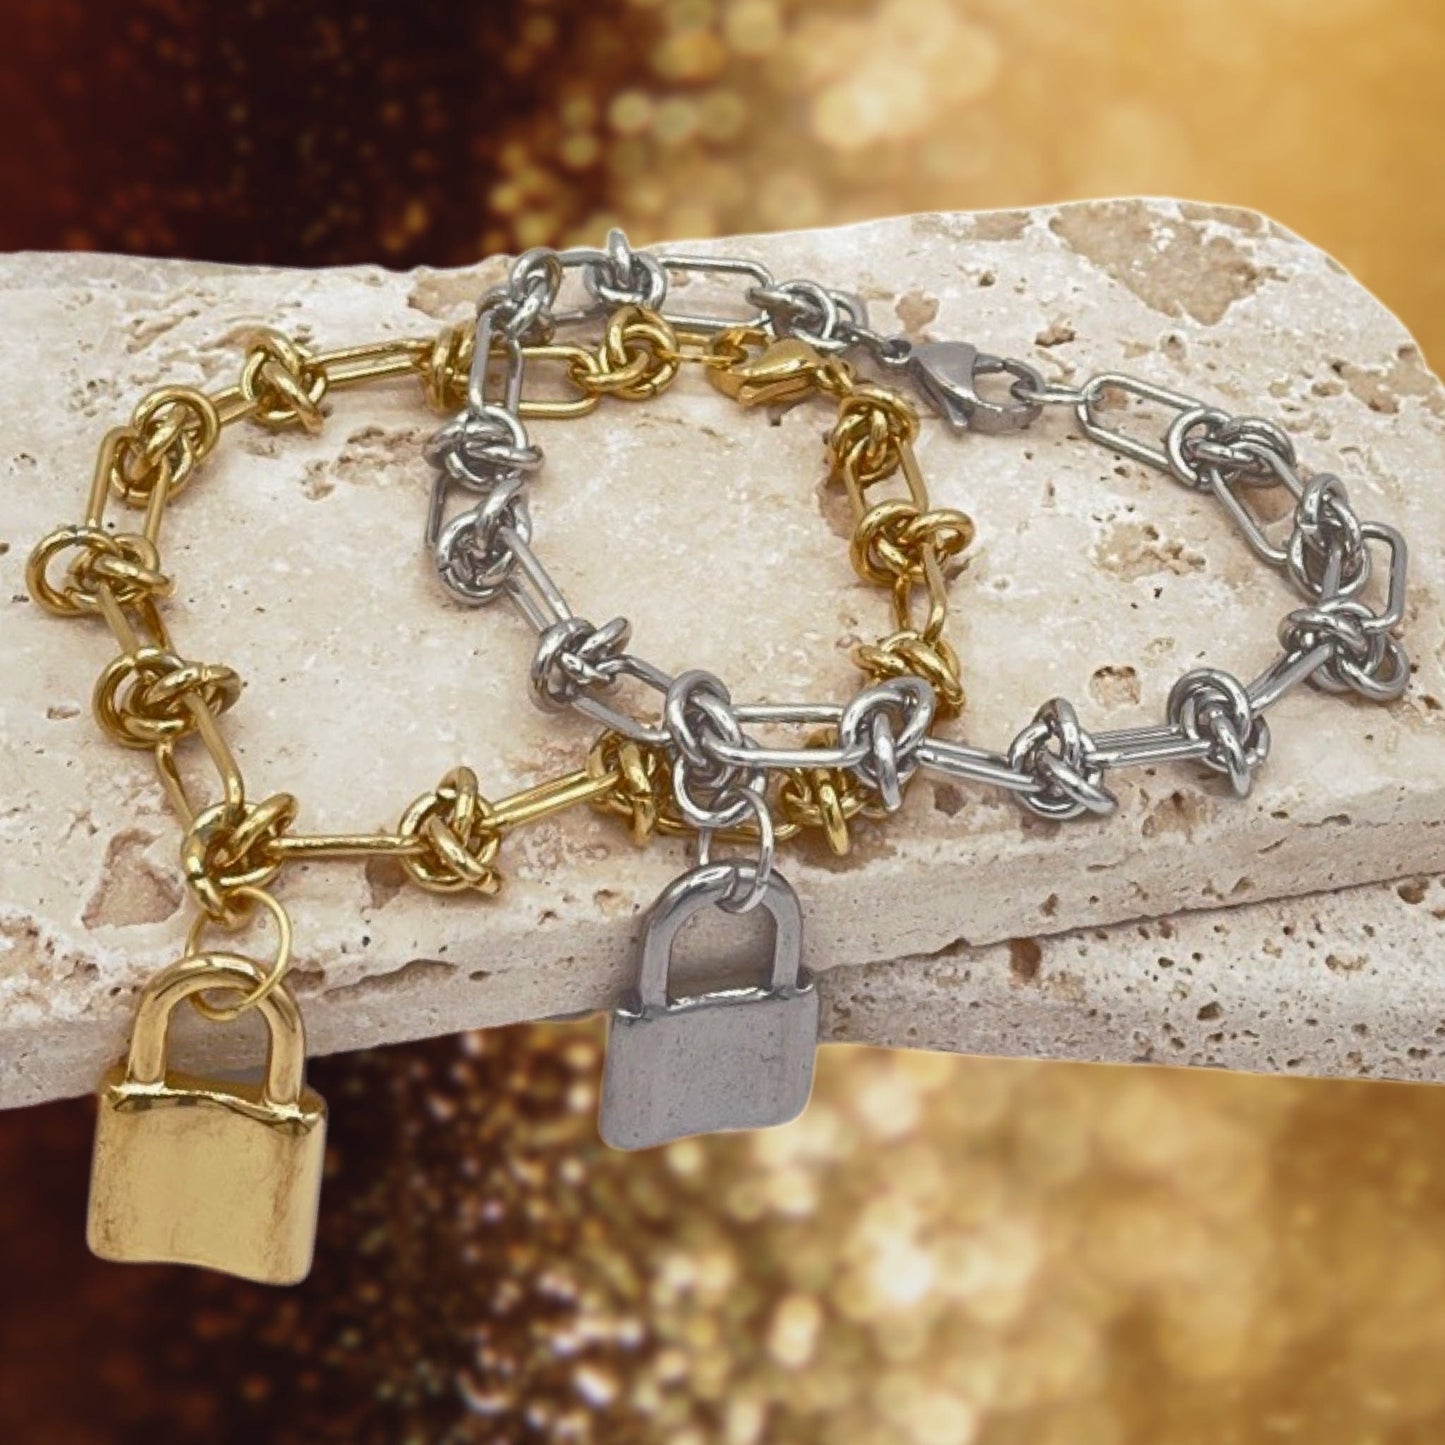 Gold Over Stainless Steel “Barbed Wire” Link Bracelet With Padlock Charm